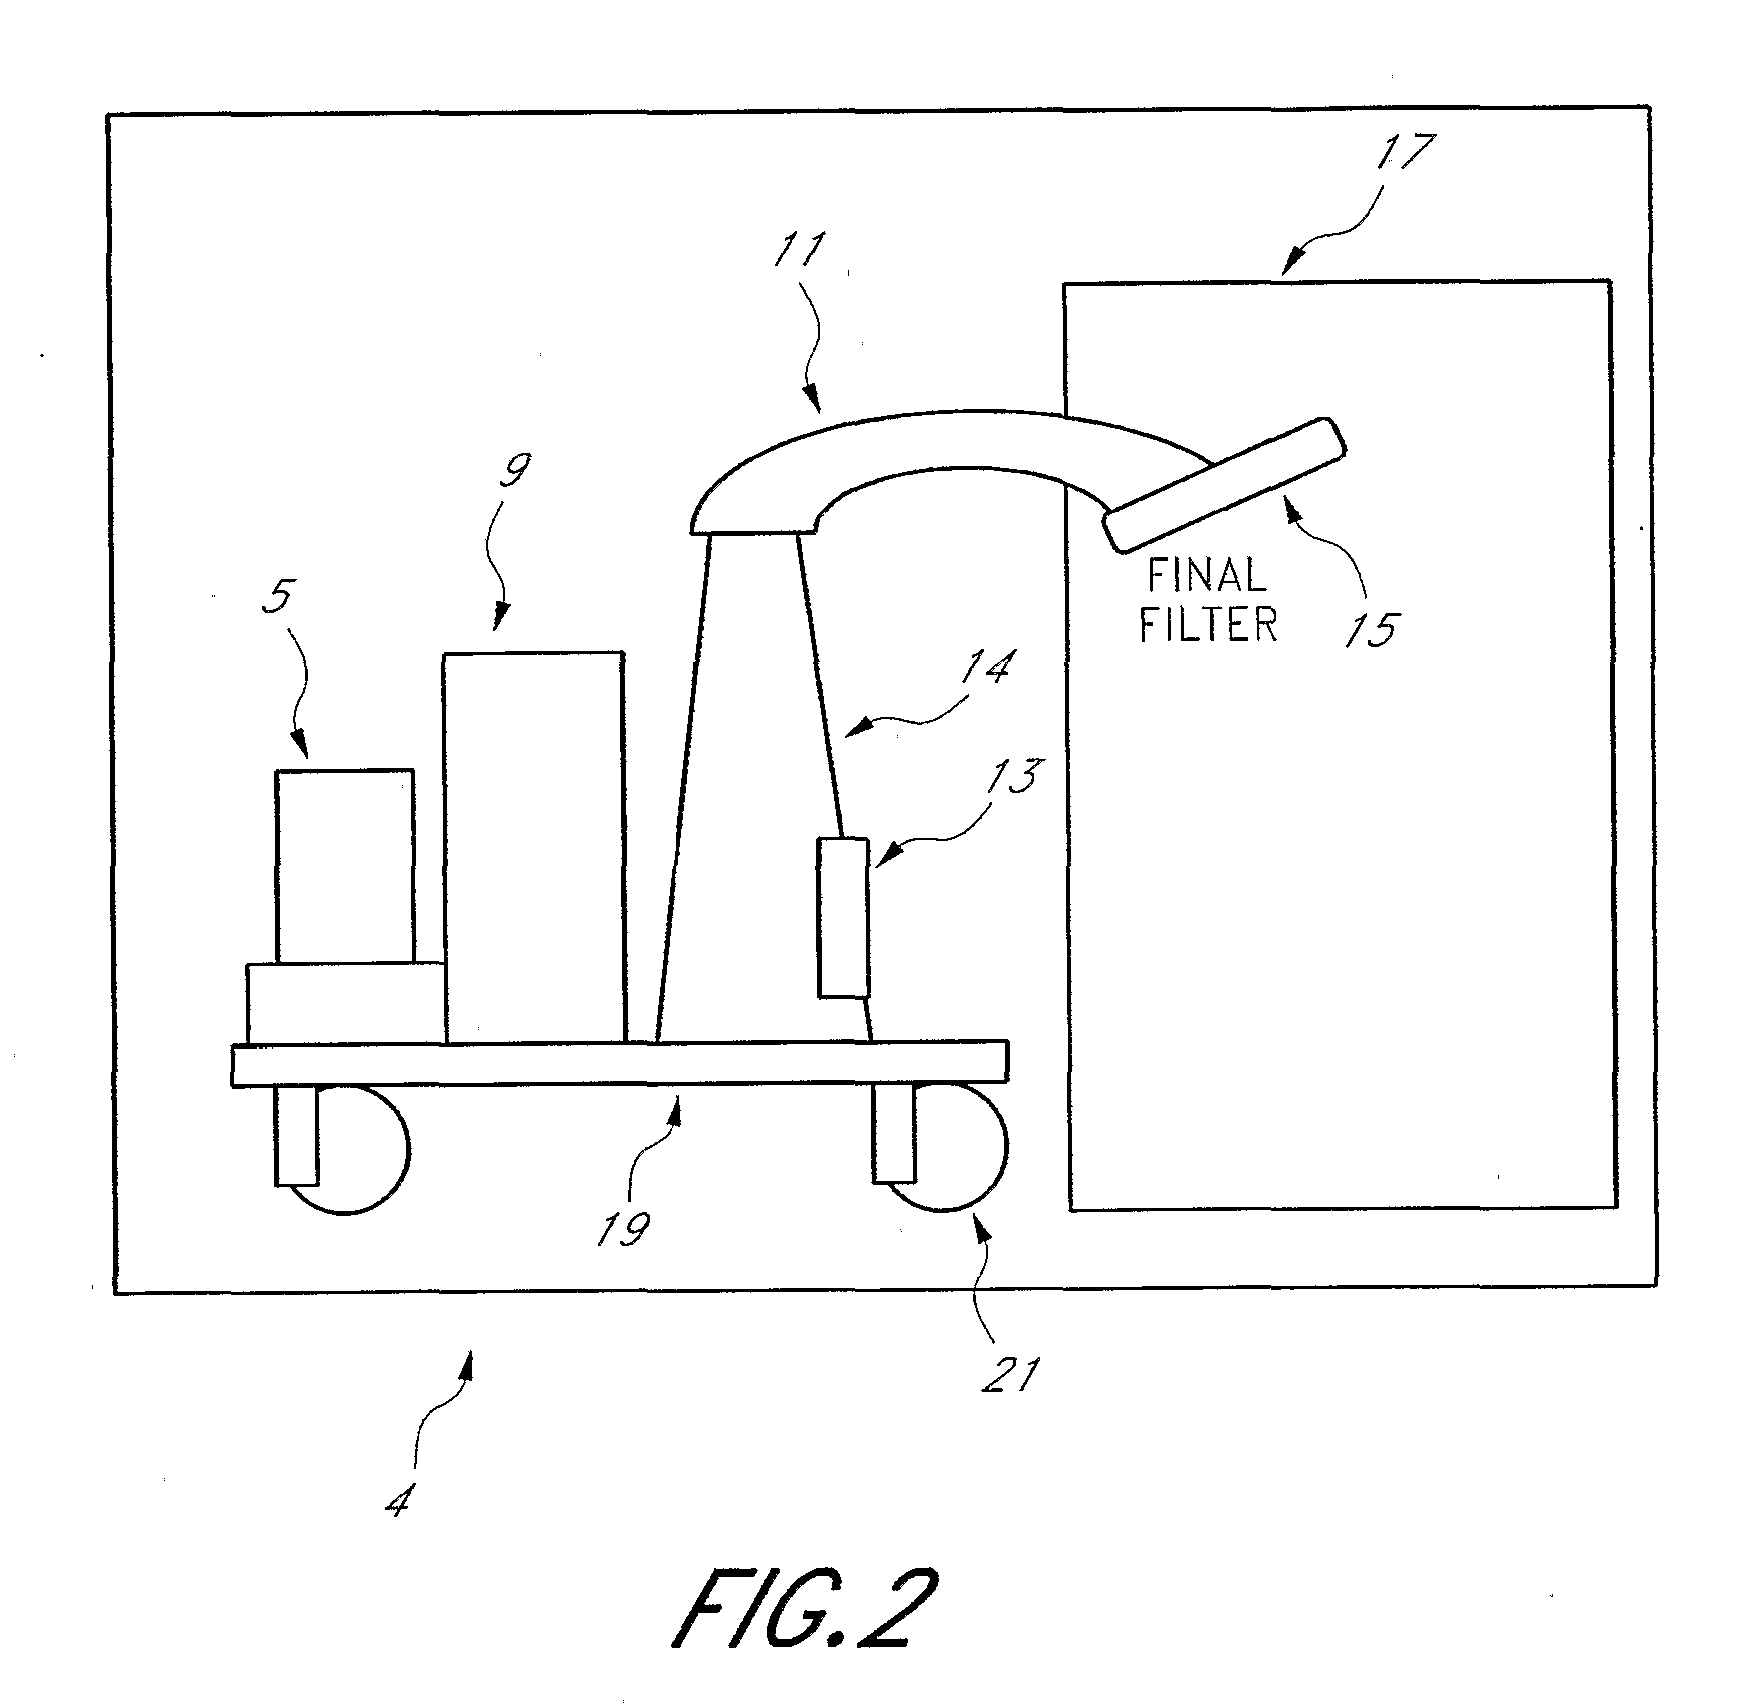 Systems for Removing Dimethyl Sulfoxide (Dmso) or Related Compounds or Odors Associated with Same